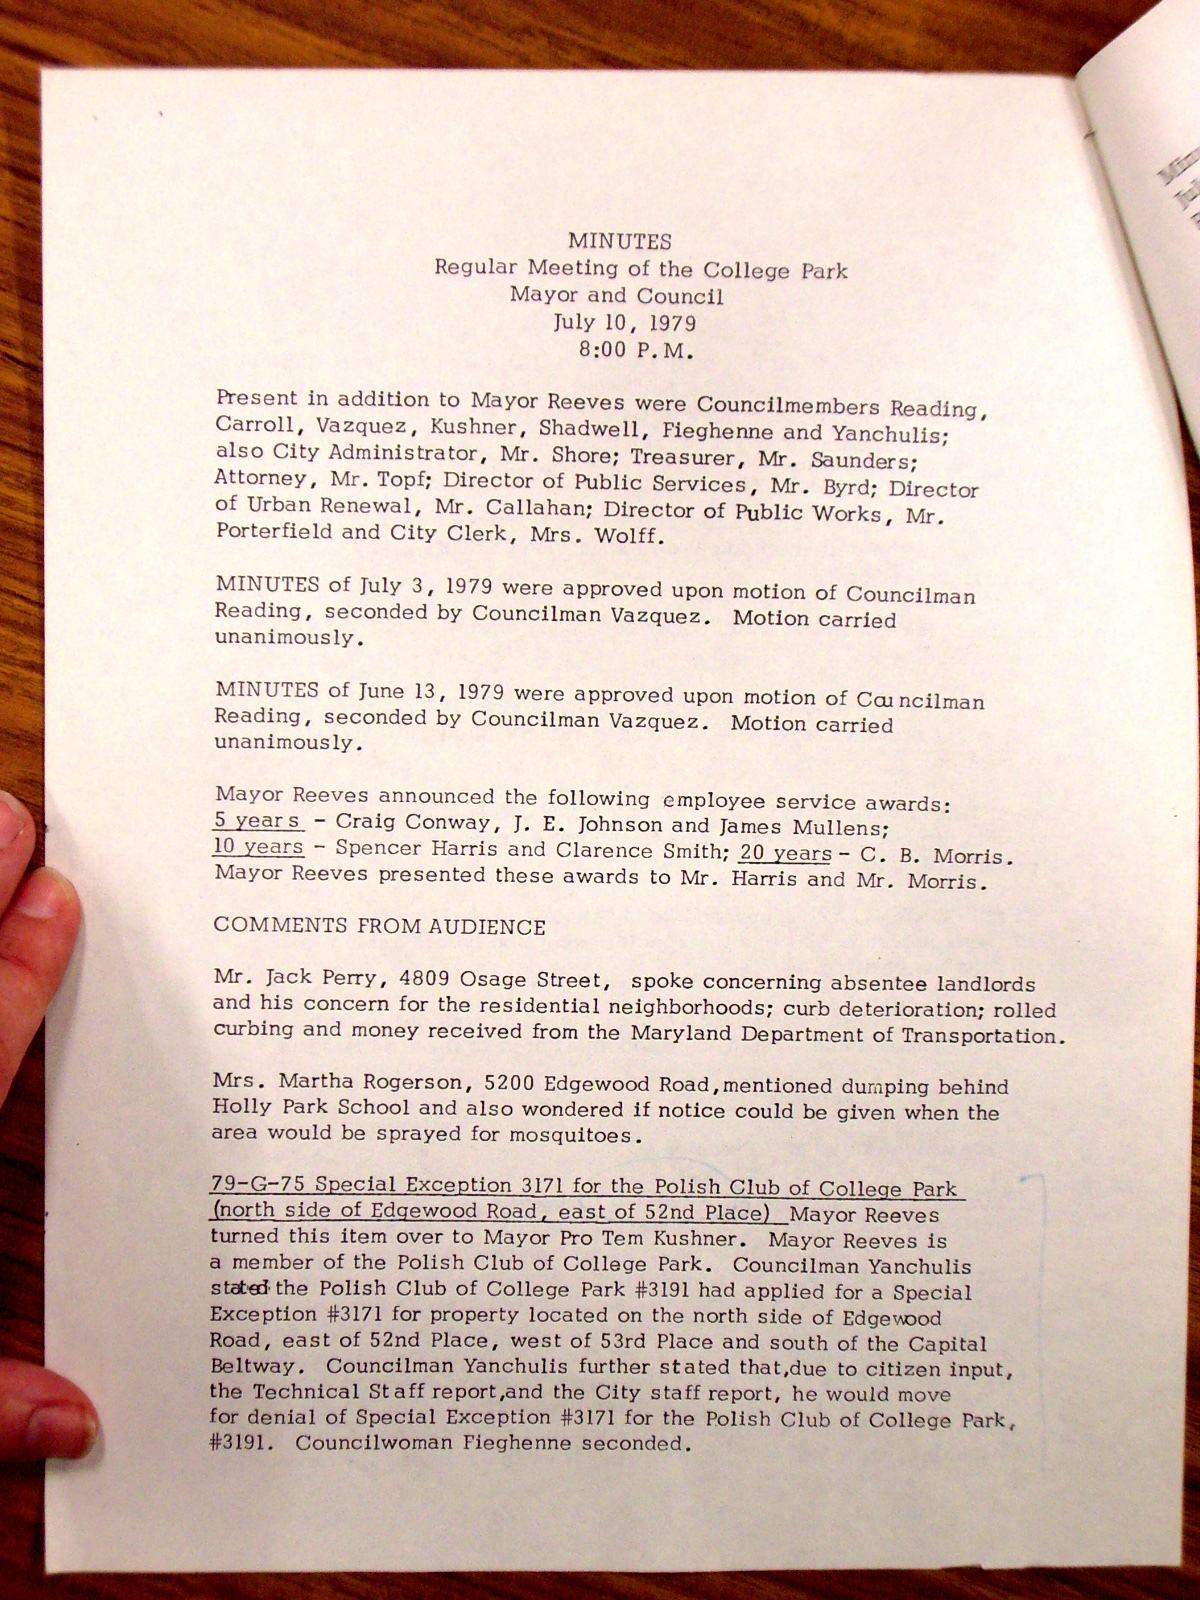 Minutes, Regular Meeting of the College Park Mayor and Council, July 10, 1979